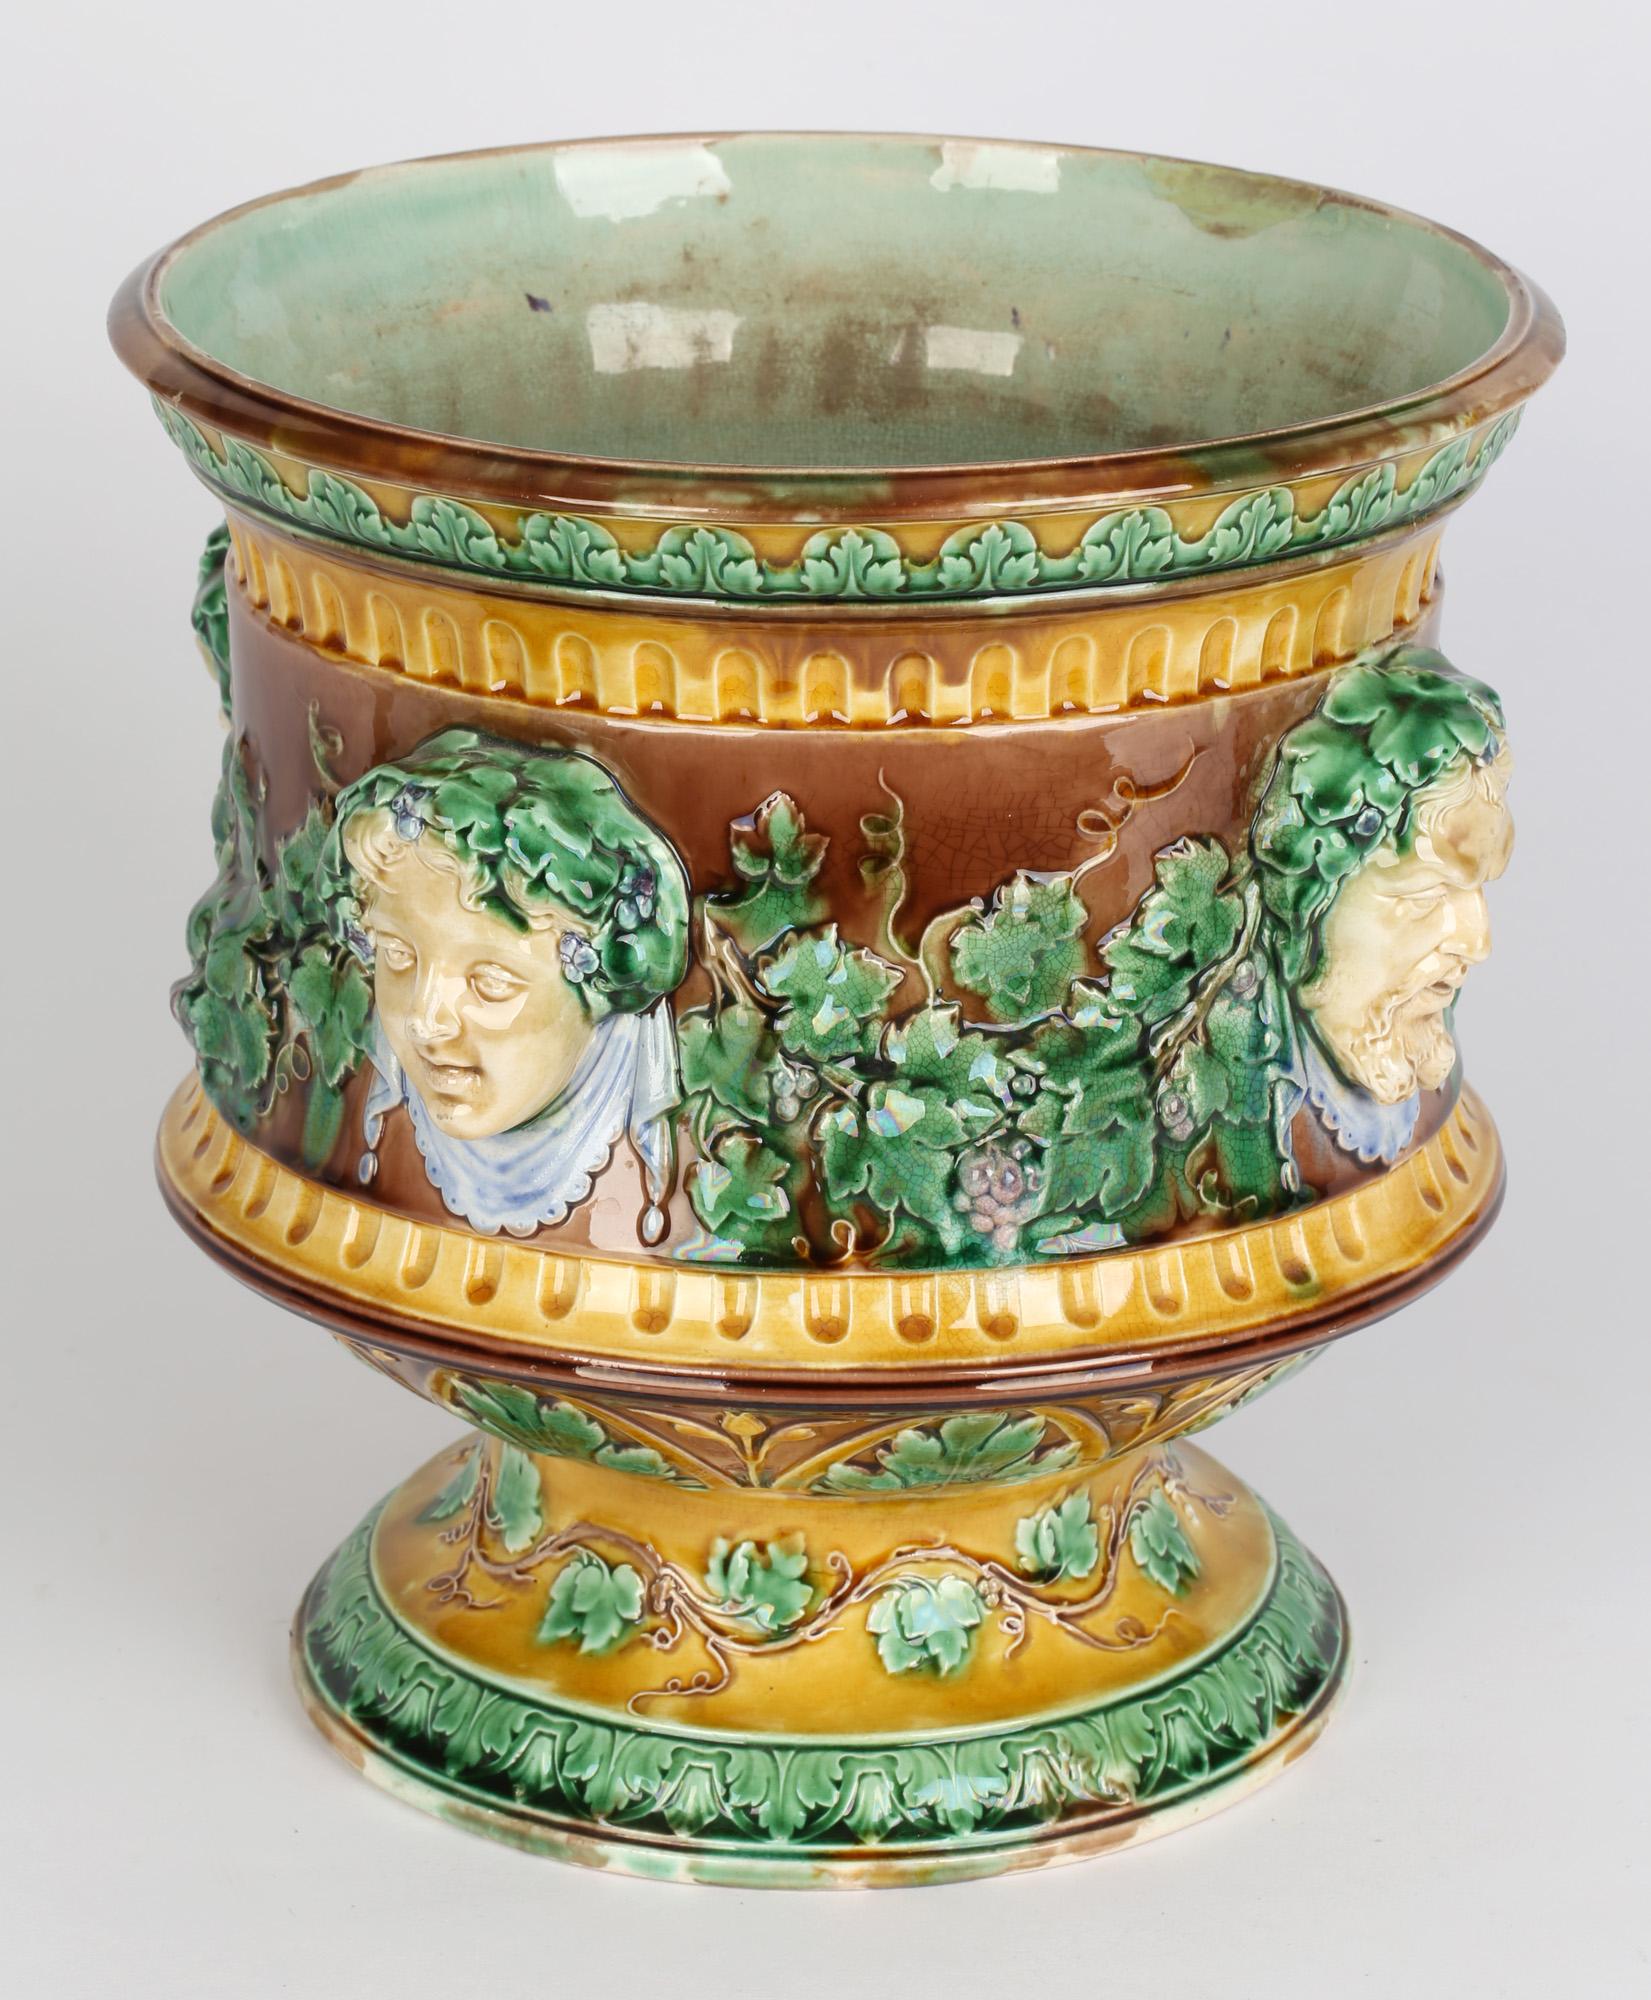 Wedgwood Large and Impressive Majolica Jardiniere with Masks and Trailing Vines For Sale 4